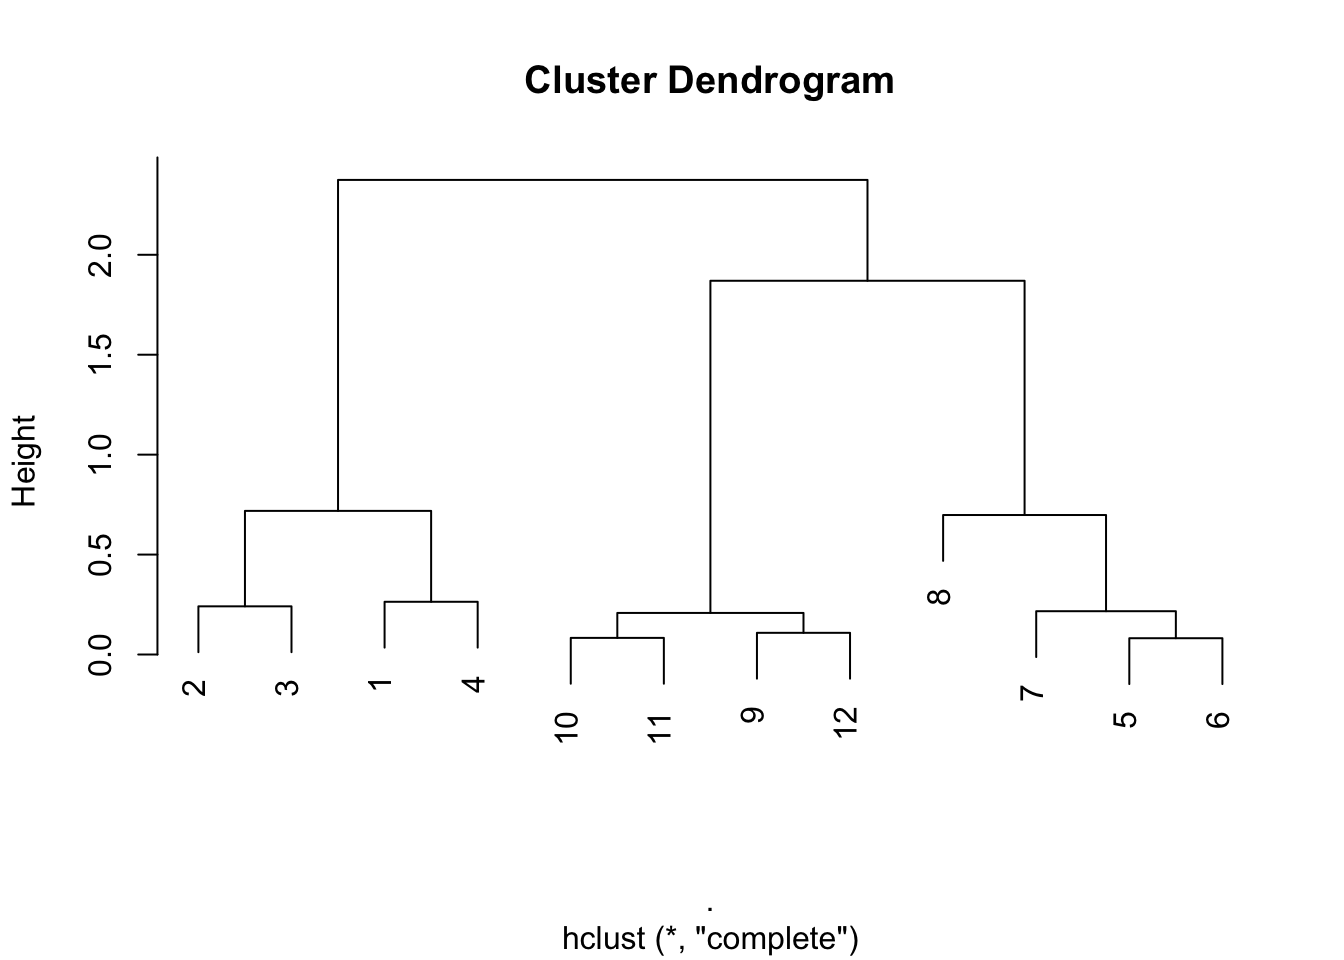 Full hierarchical clustering dendrogram